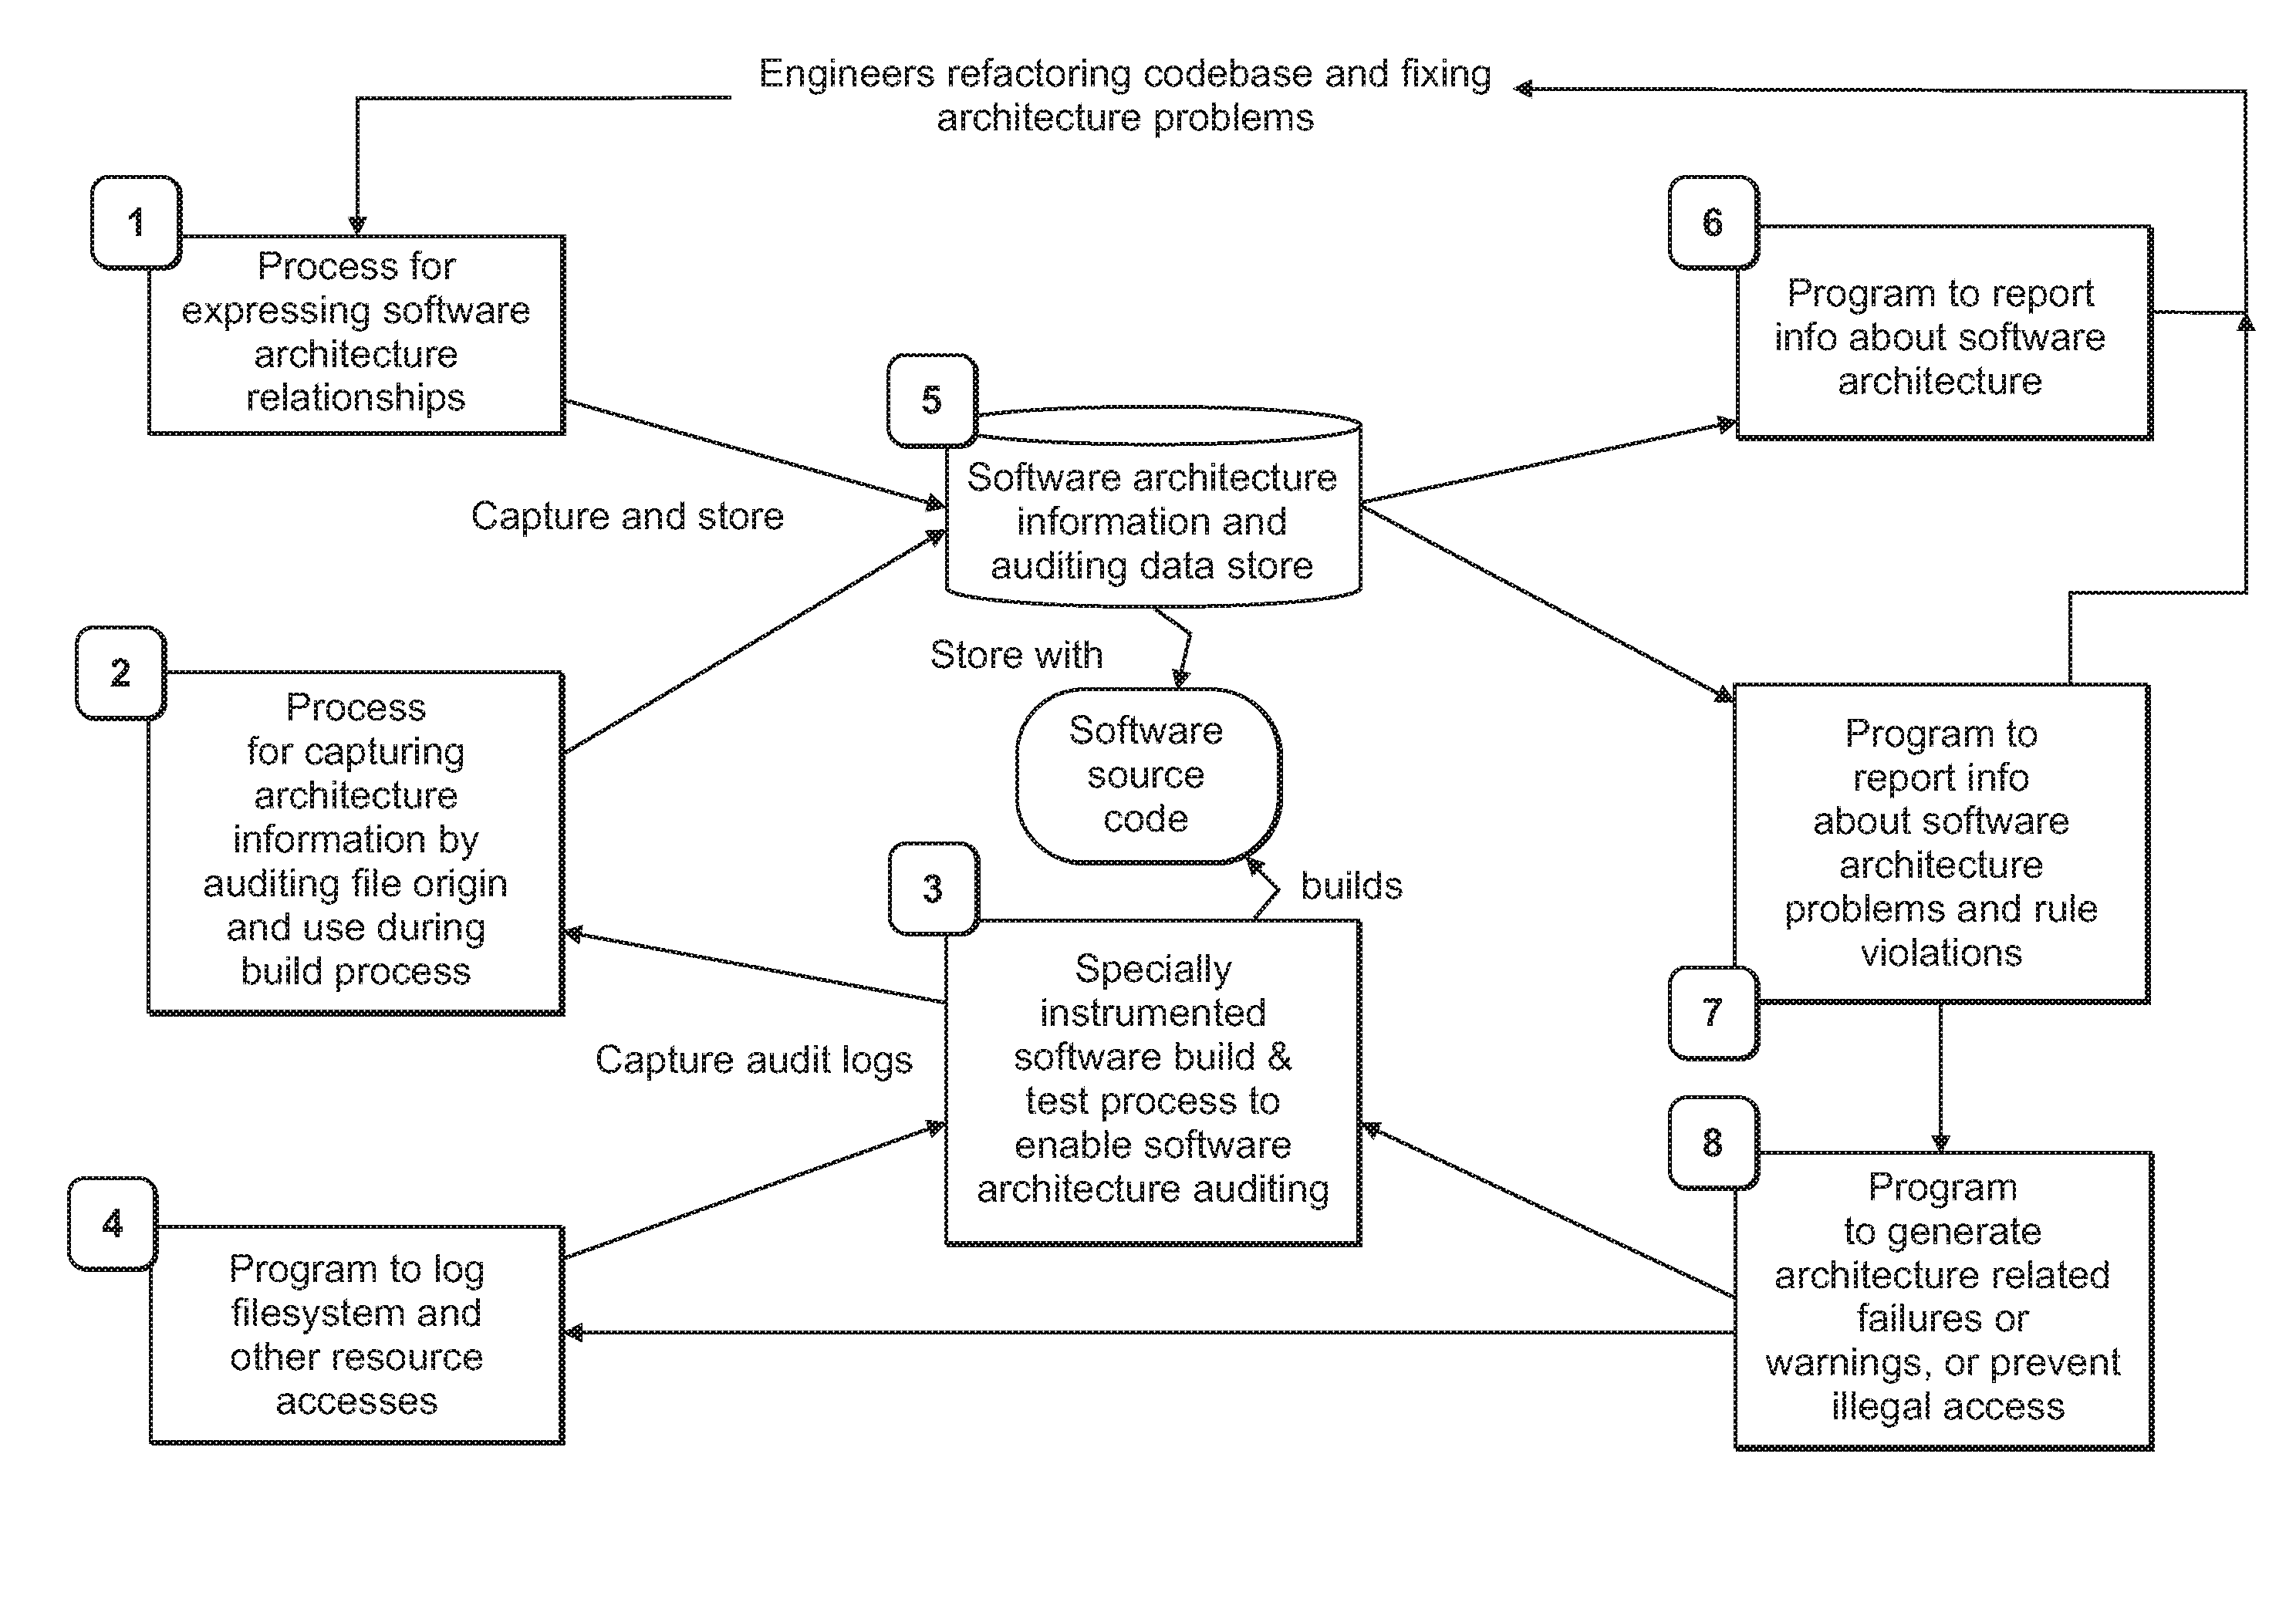 Computer-implemented tools and methods for extracting information about the structure of a large computer software system, exploring its structure, discovering problems in its design, and enabling refactoring